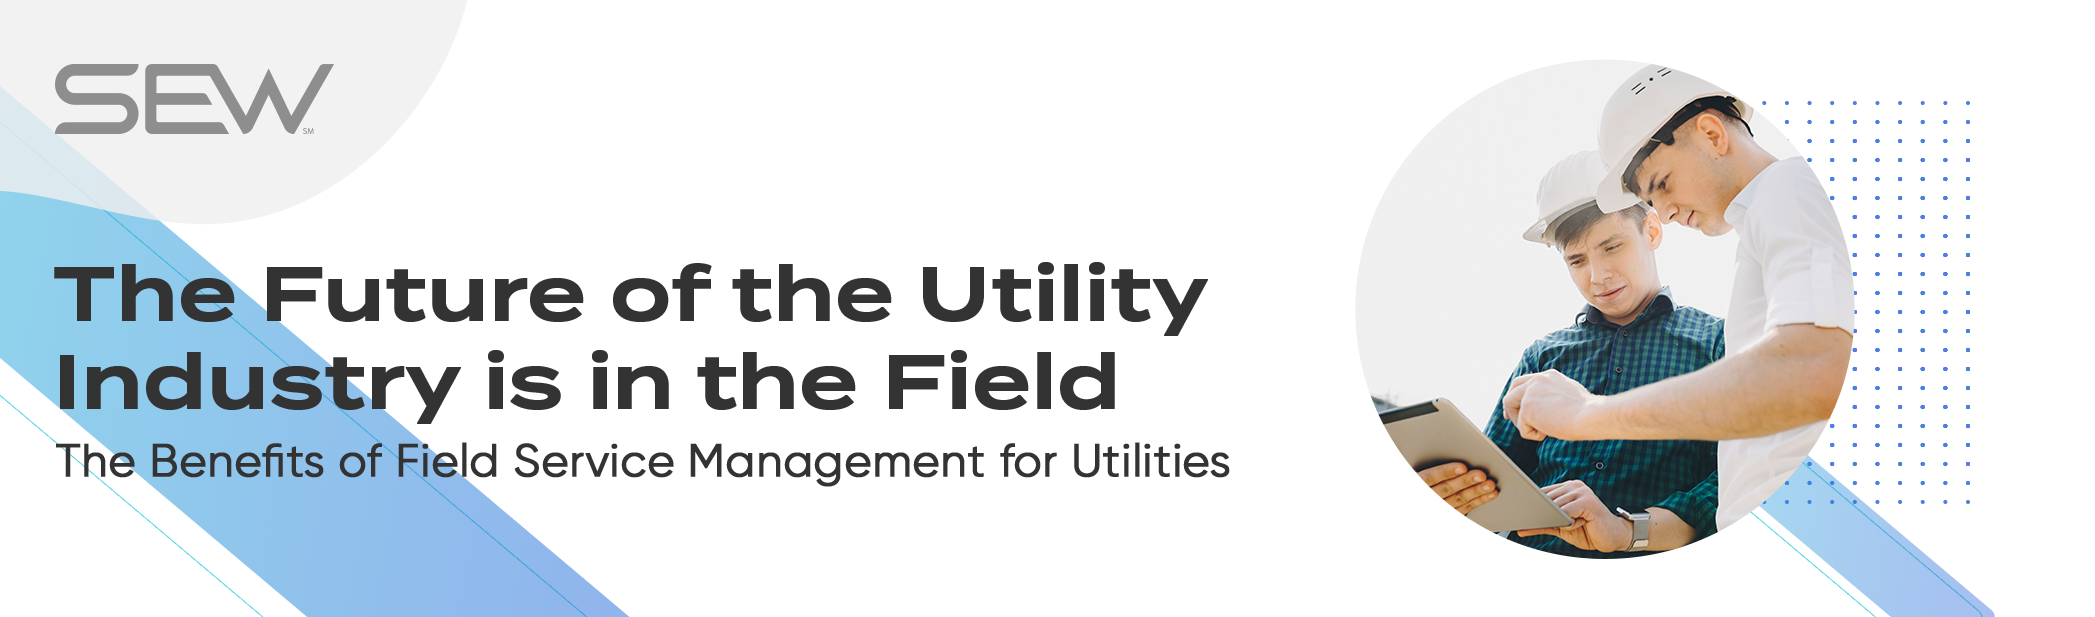 The Future of the Utility Industry is in the Field